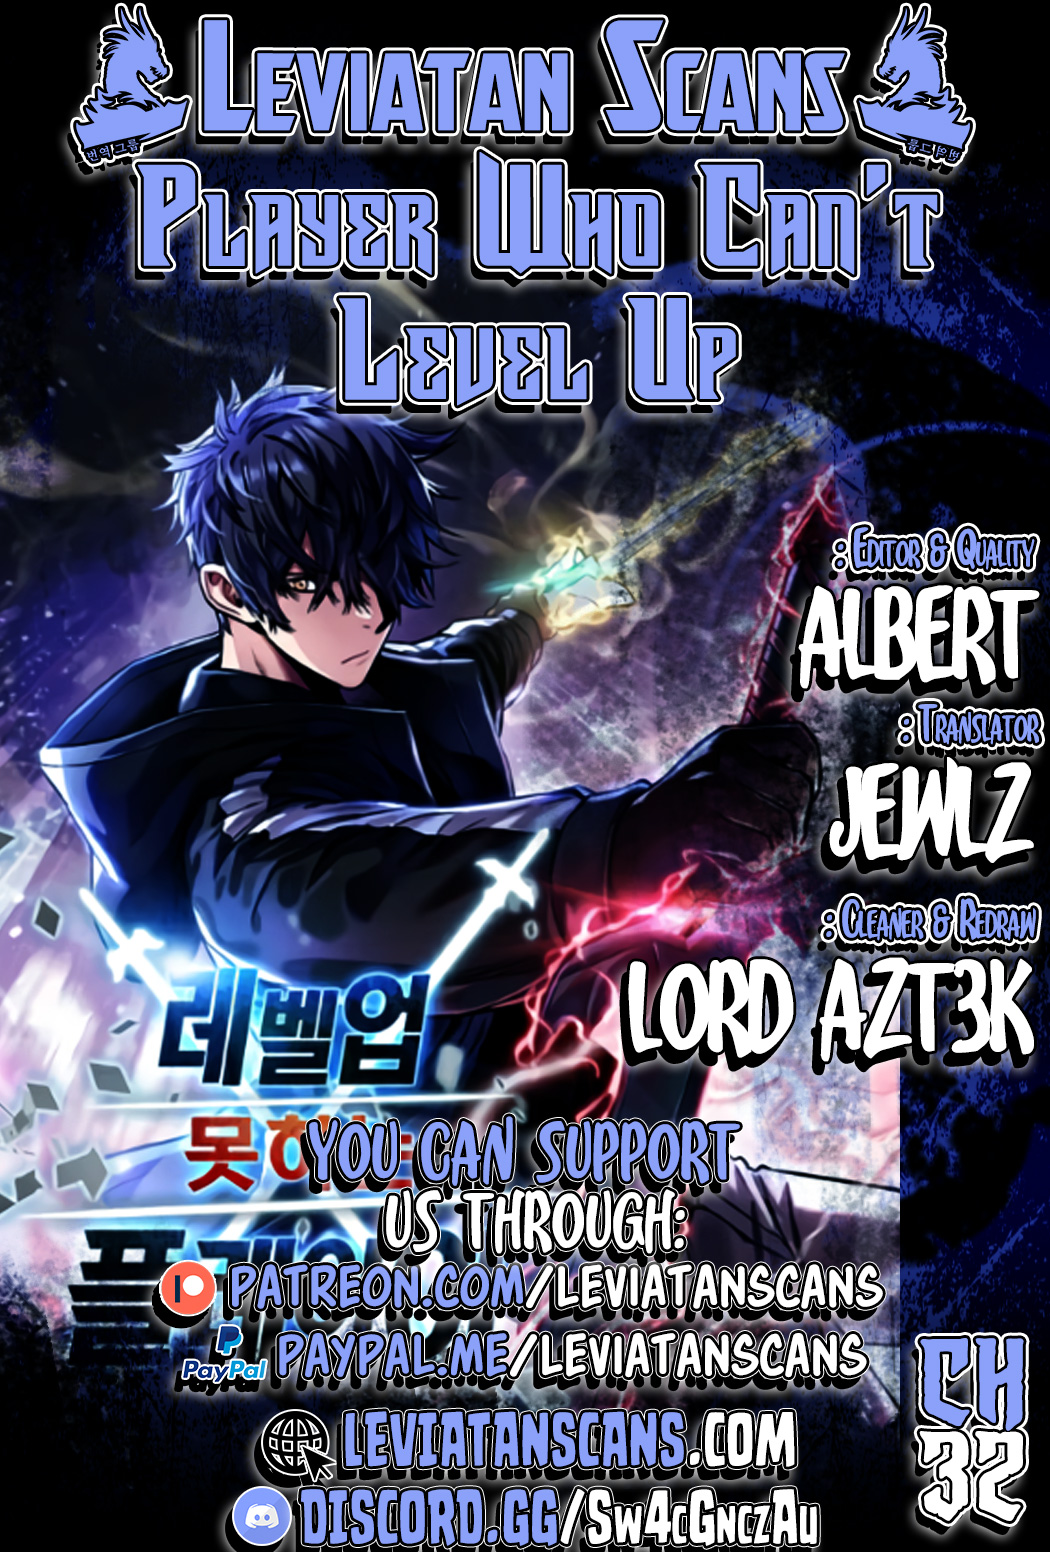 The Player That Can't Level Up - Chapter 5523 - Image 1